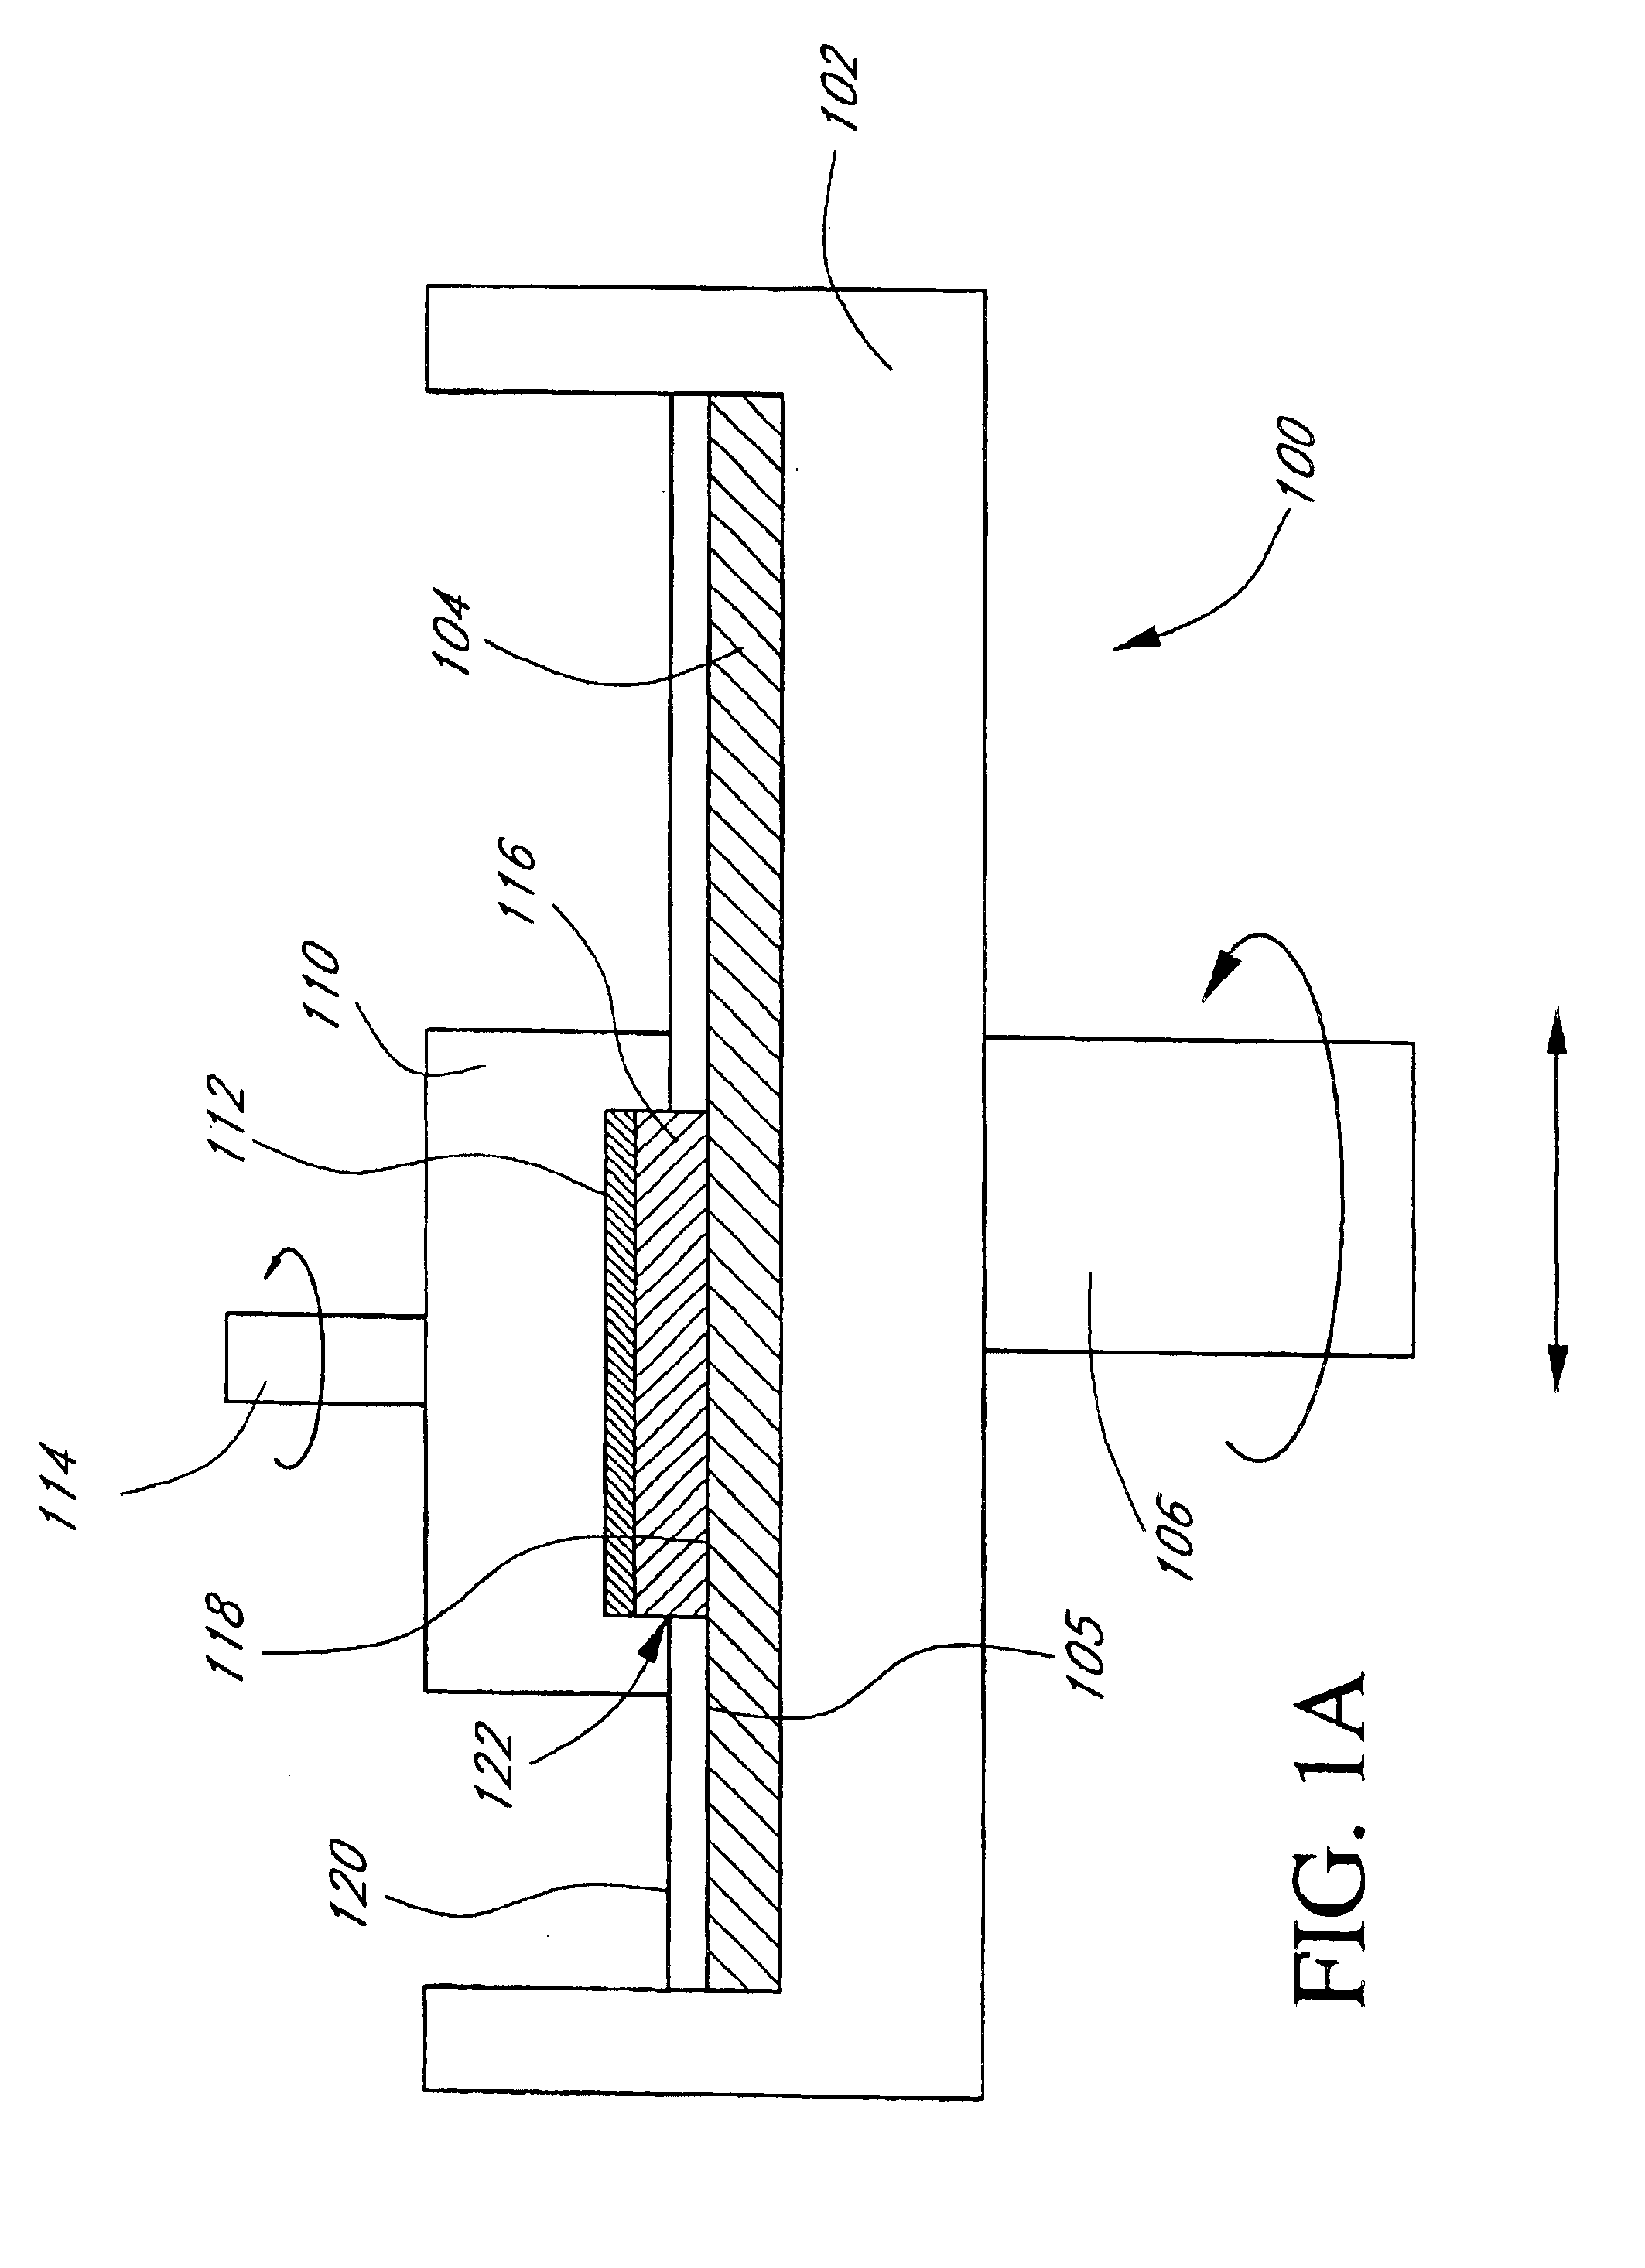 Device and method for collecting and measuring chemical samples on pad surface in CMP